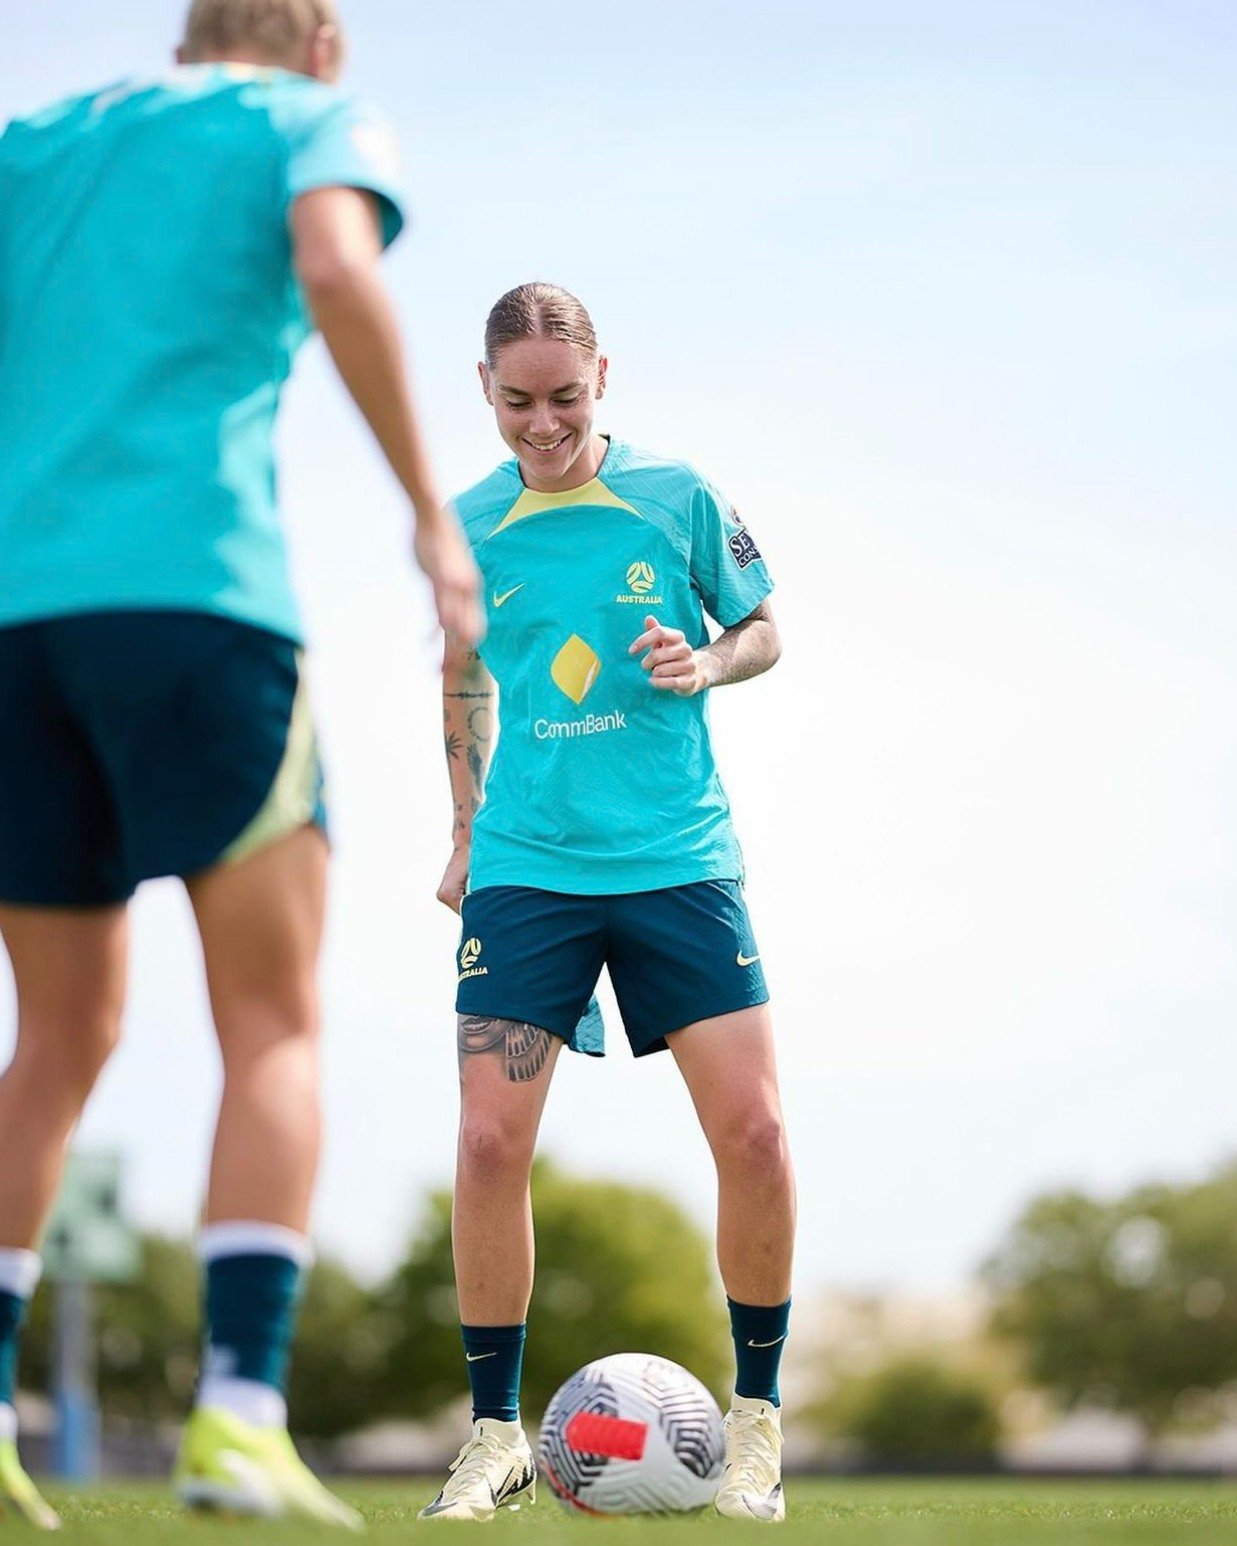 As you may already know, Sharn, our Practice Manager, has received her first CommBank Matilda&rsquo;s call-up for their international friendly against Mexico in the United States during the April FIFA Women&rsquo;s International Window 👏

Make sure 